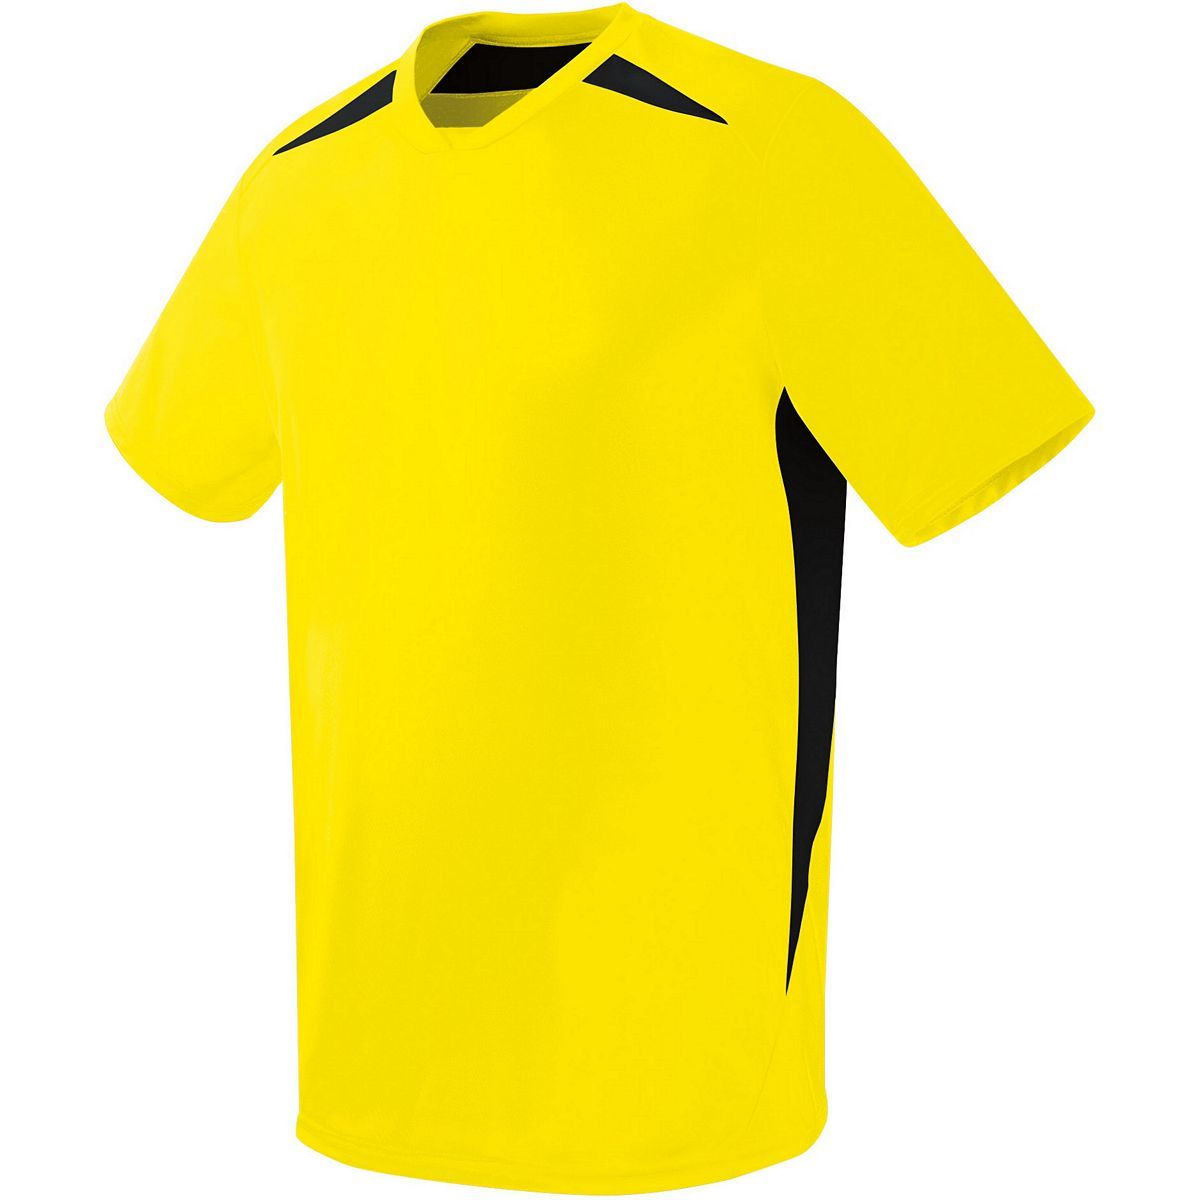 High 5 Youth Hawk Jersey in Power Yellow/Black  -Part of the Youth, Youth-Jersey, High5-Products, Soccer, Shirts, All-Sports-1 product lines at KanaleyCreations.com